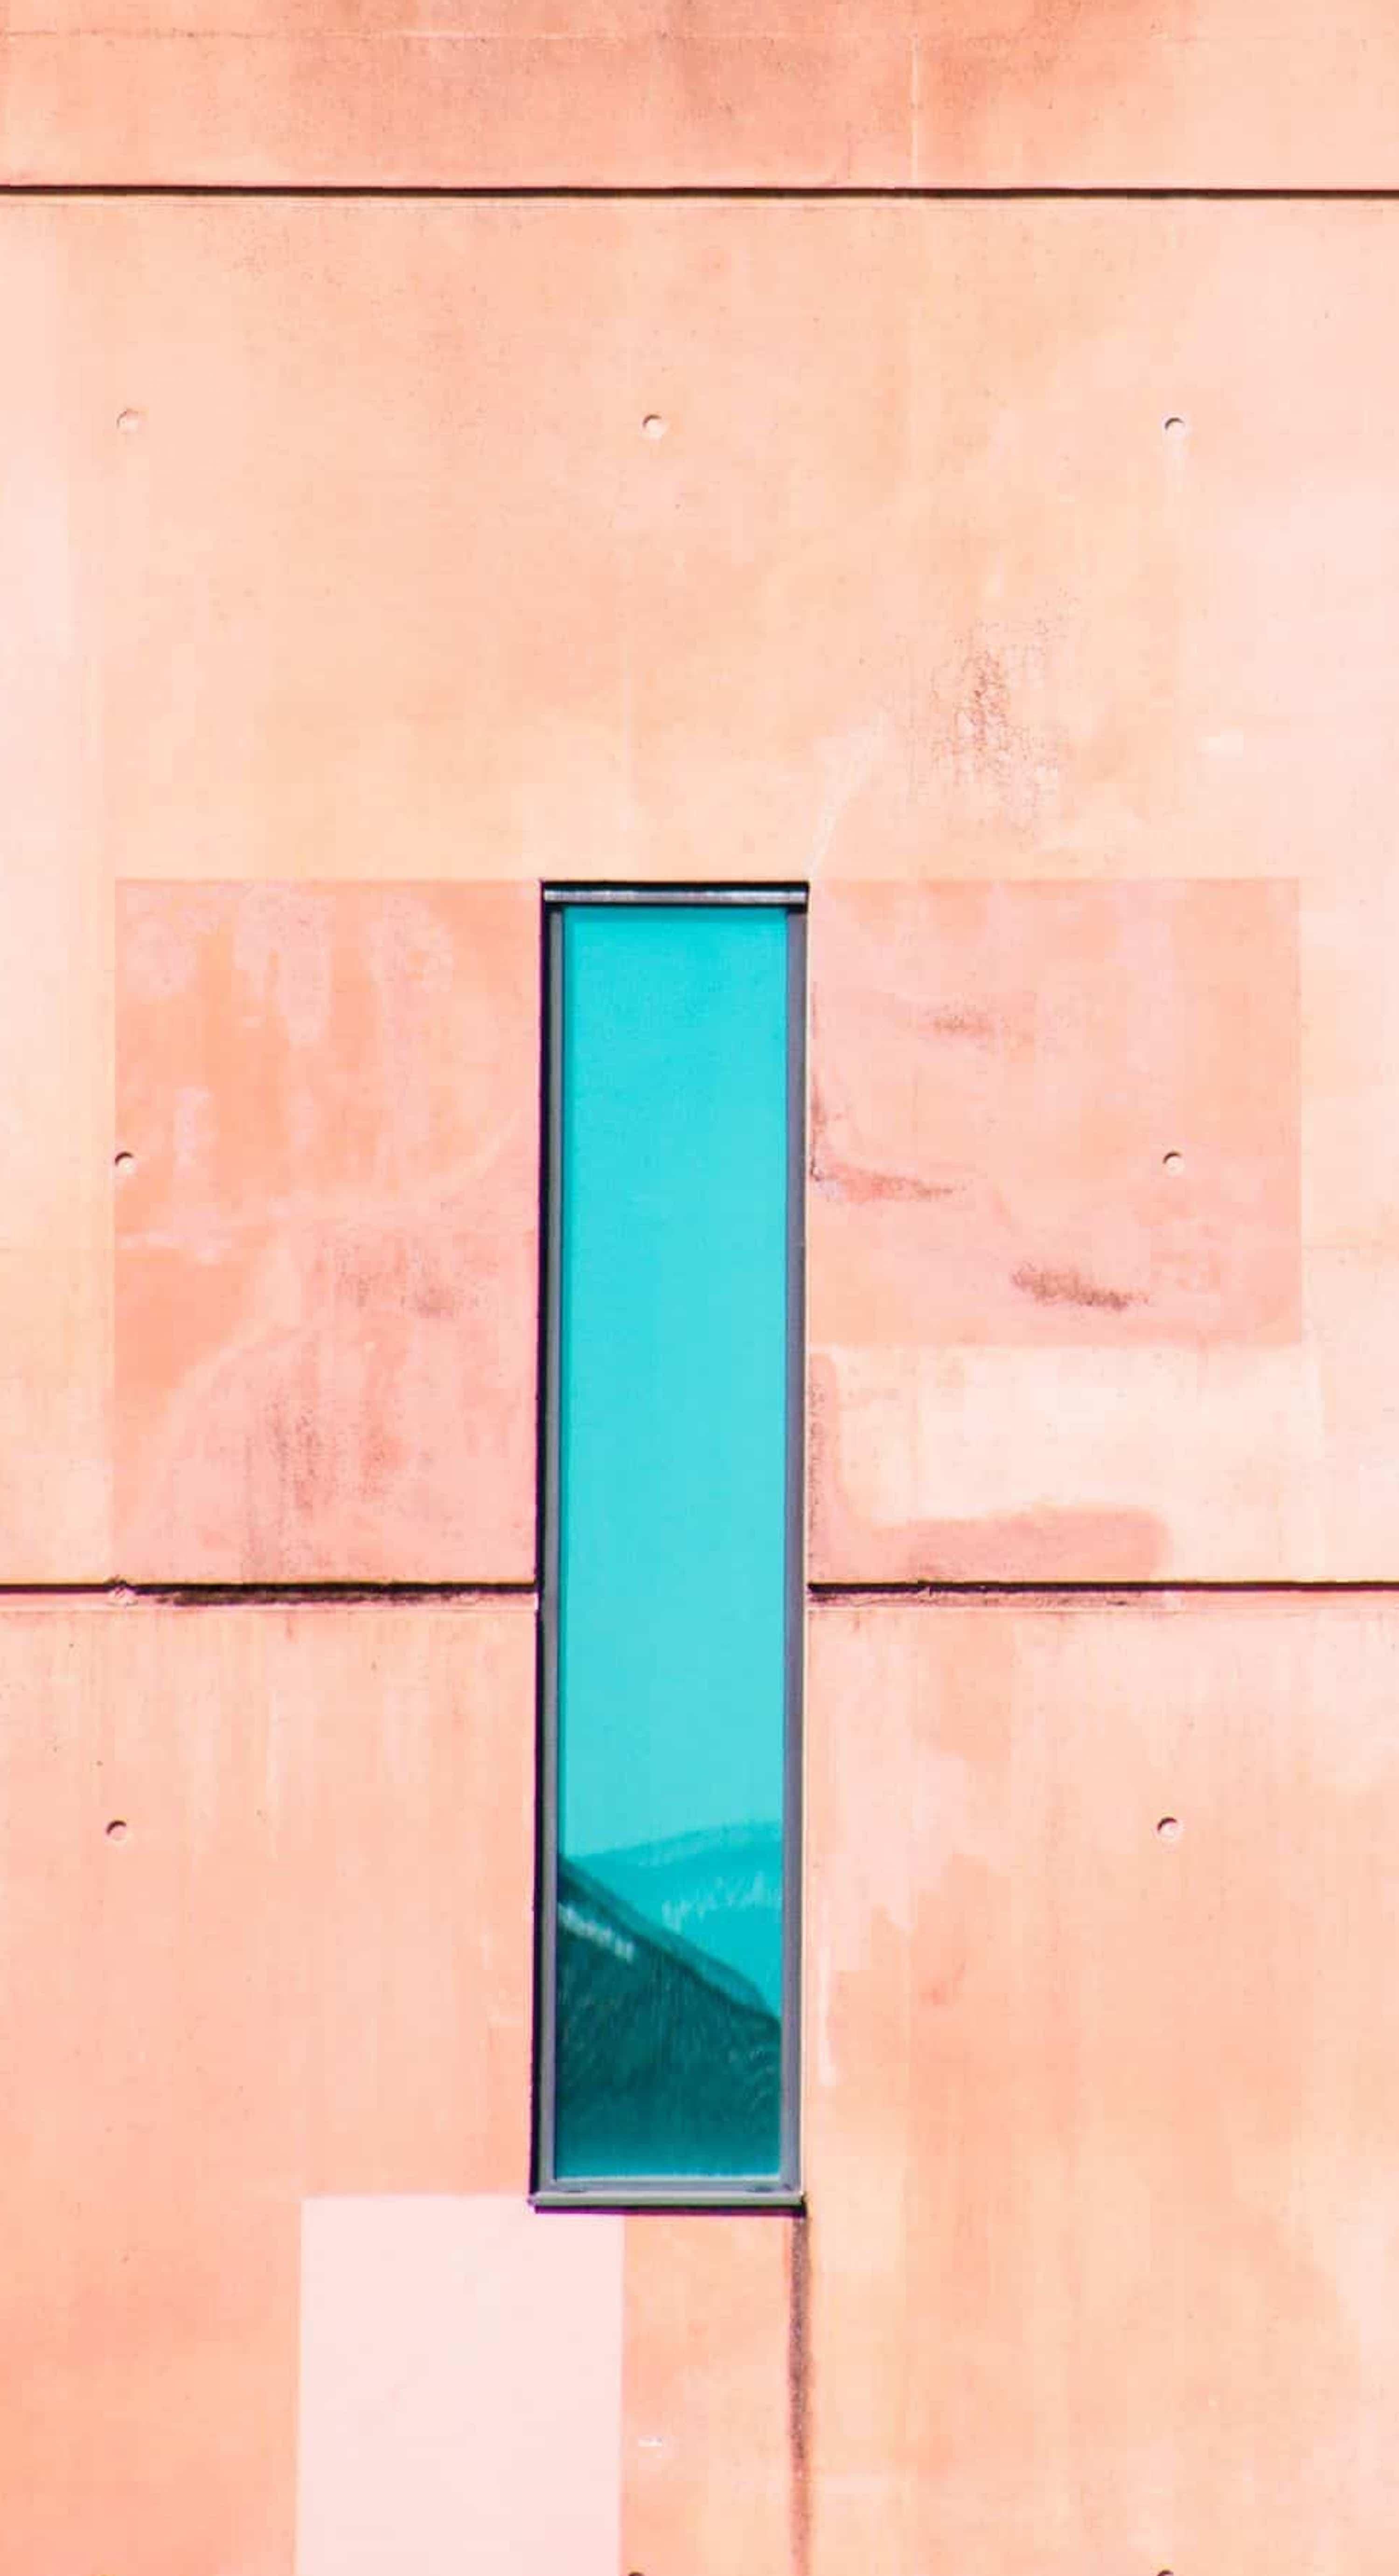 Untitled XII by Matthieu Venot - Abstract photography, architecture, pink wall For Sale 3